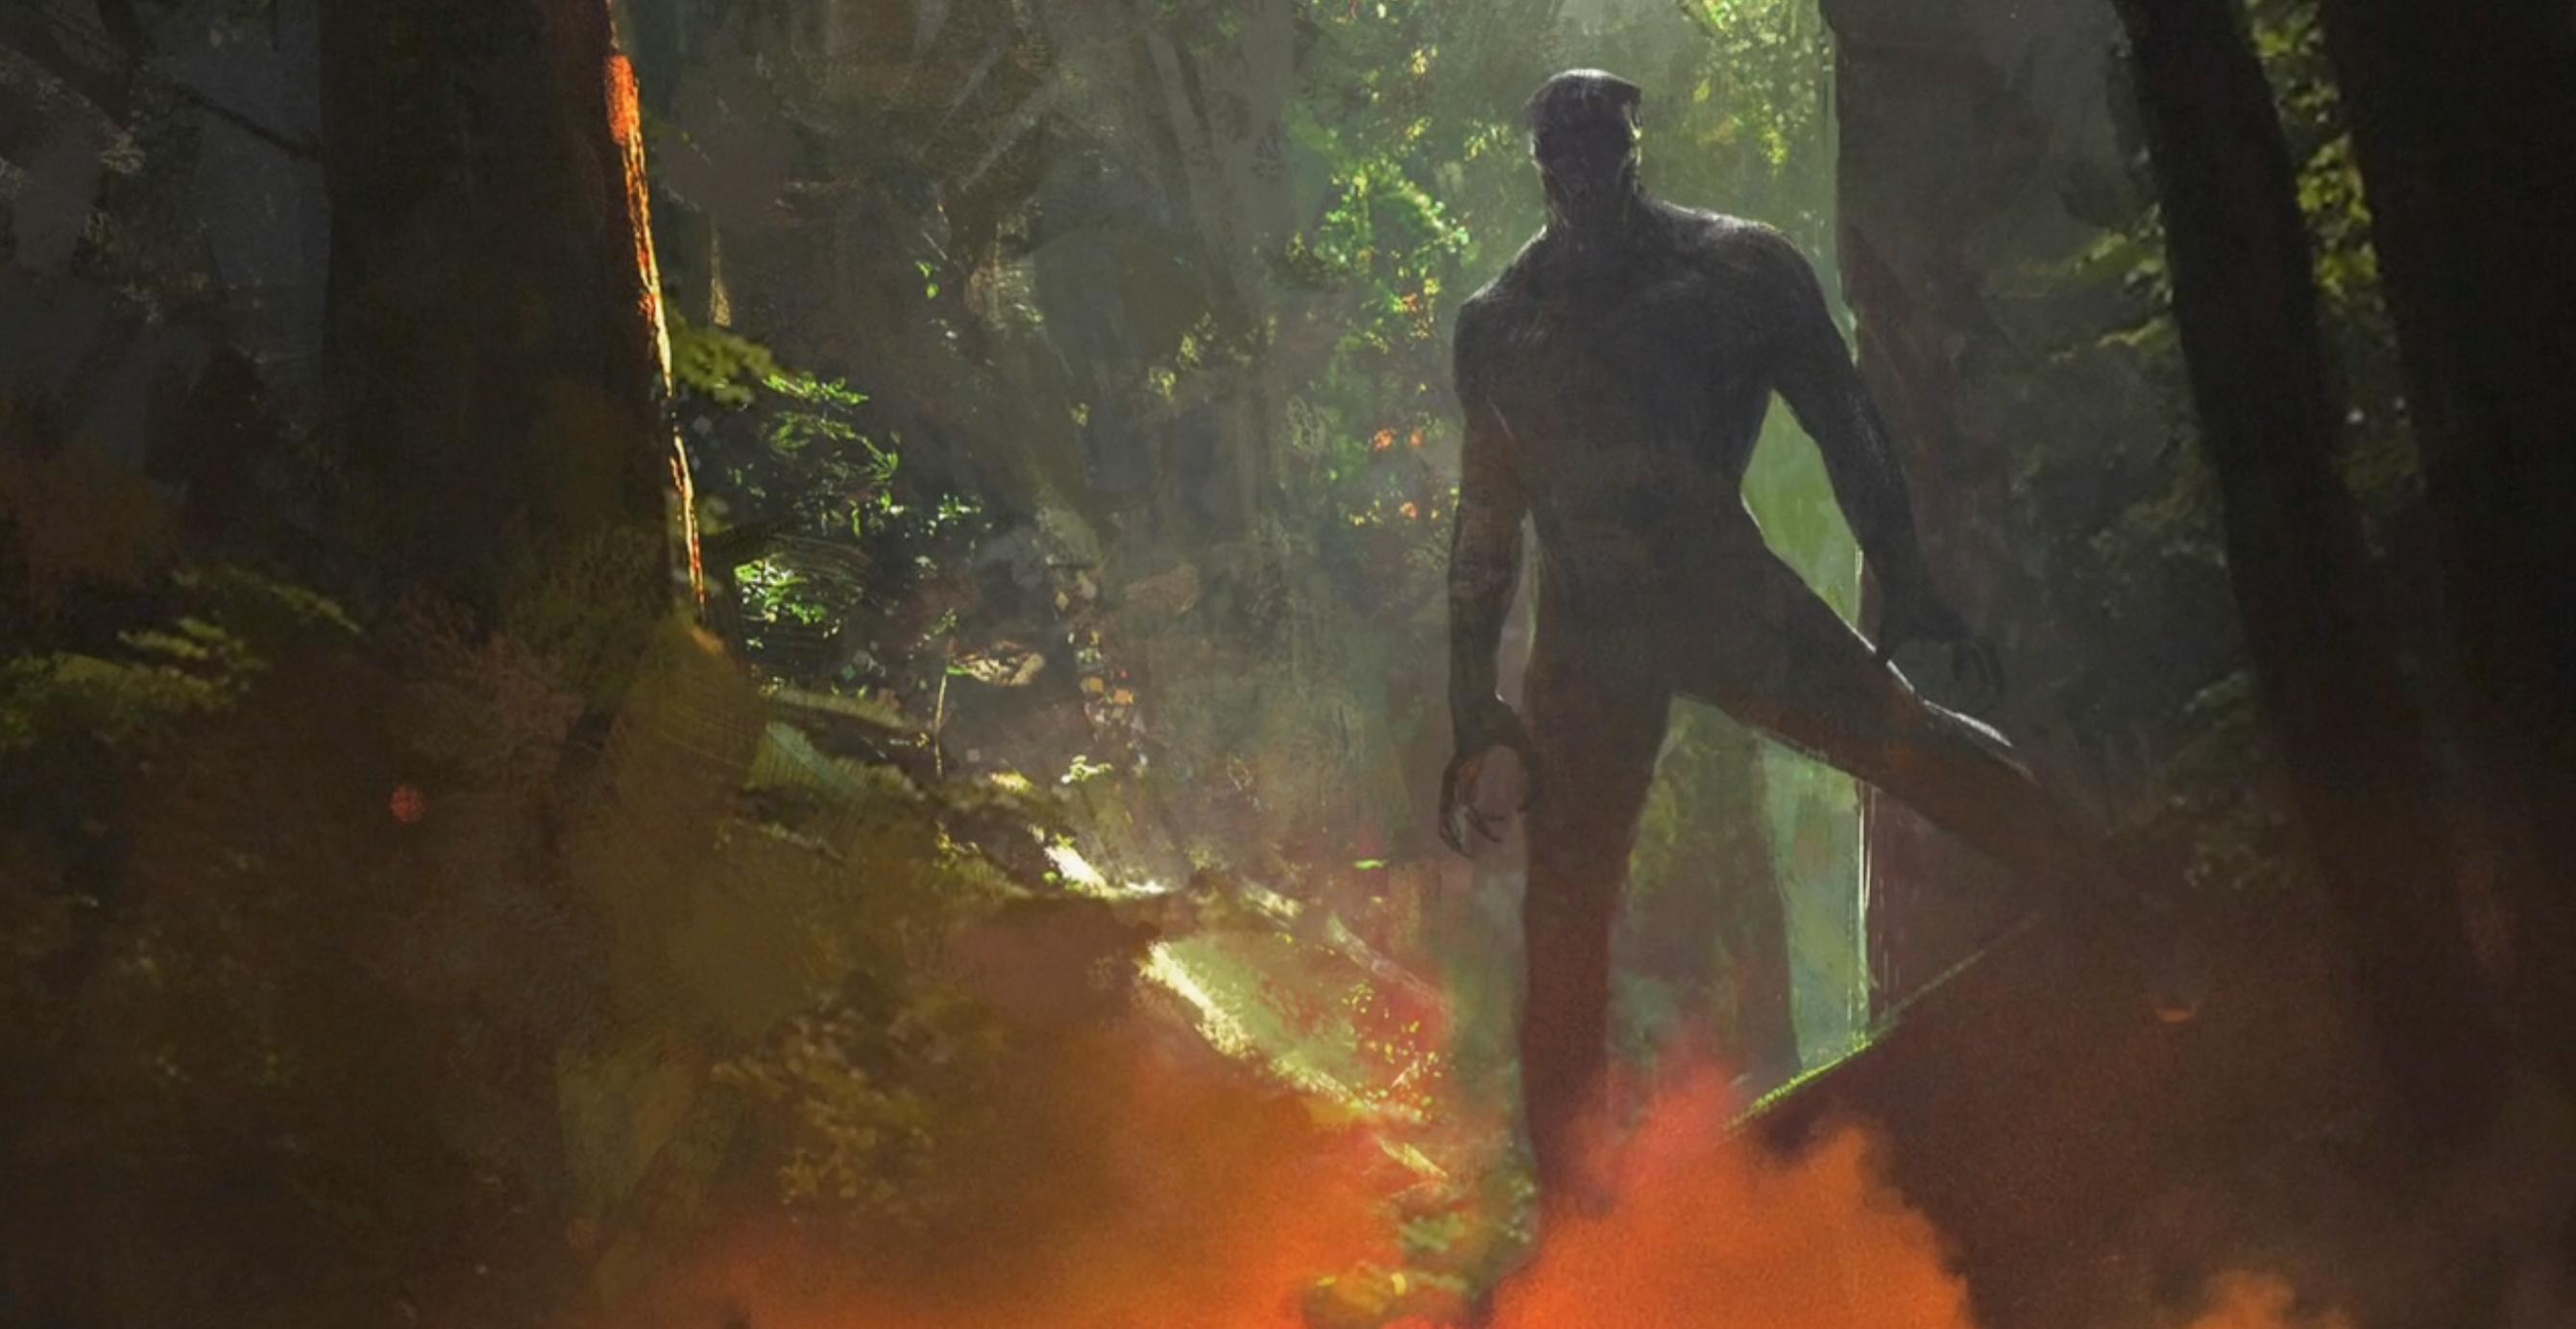 Travel to Wakanda in New Black Panther Concept Art